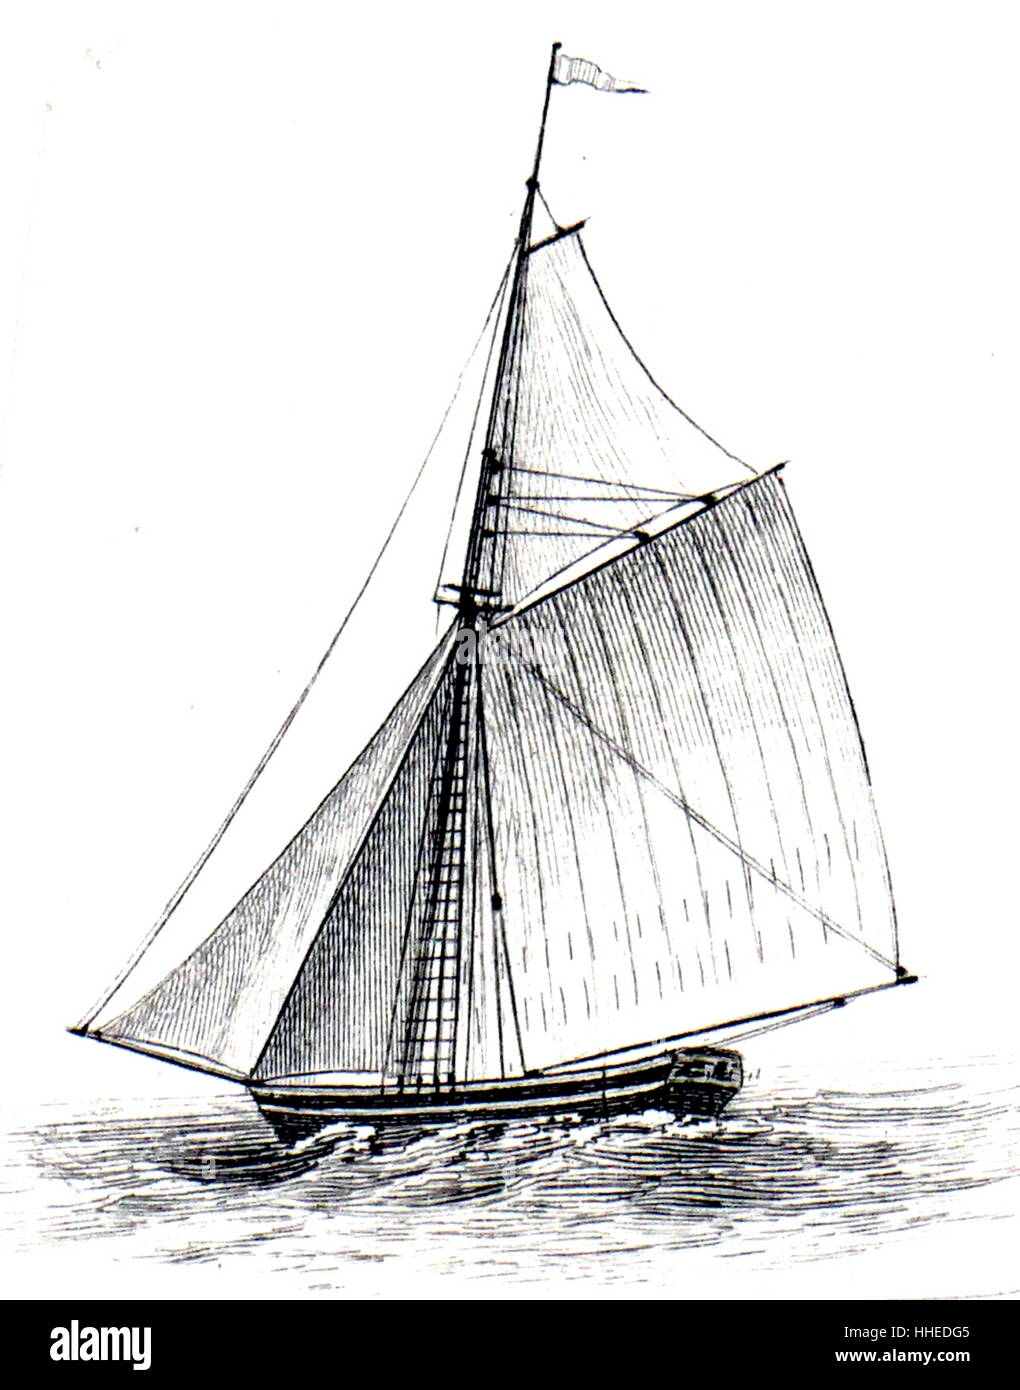 Illustration depicting a sloop built by Blackie & Son. Dated 20th Century Stock Photo